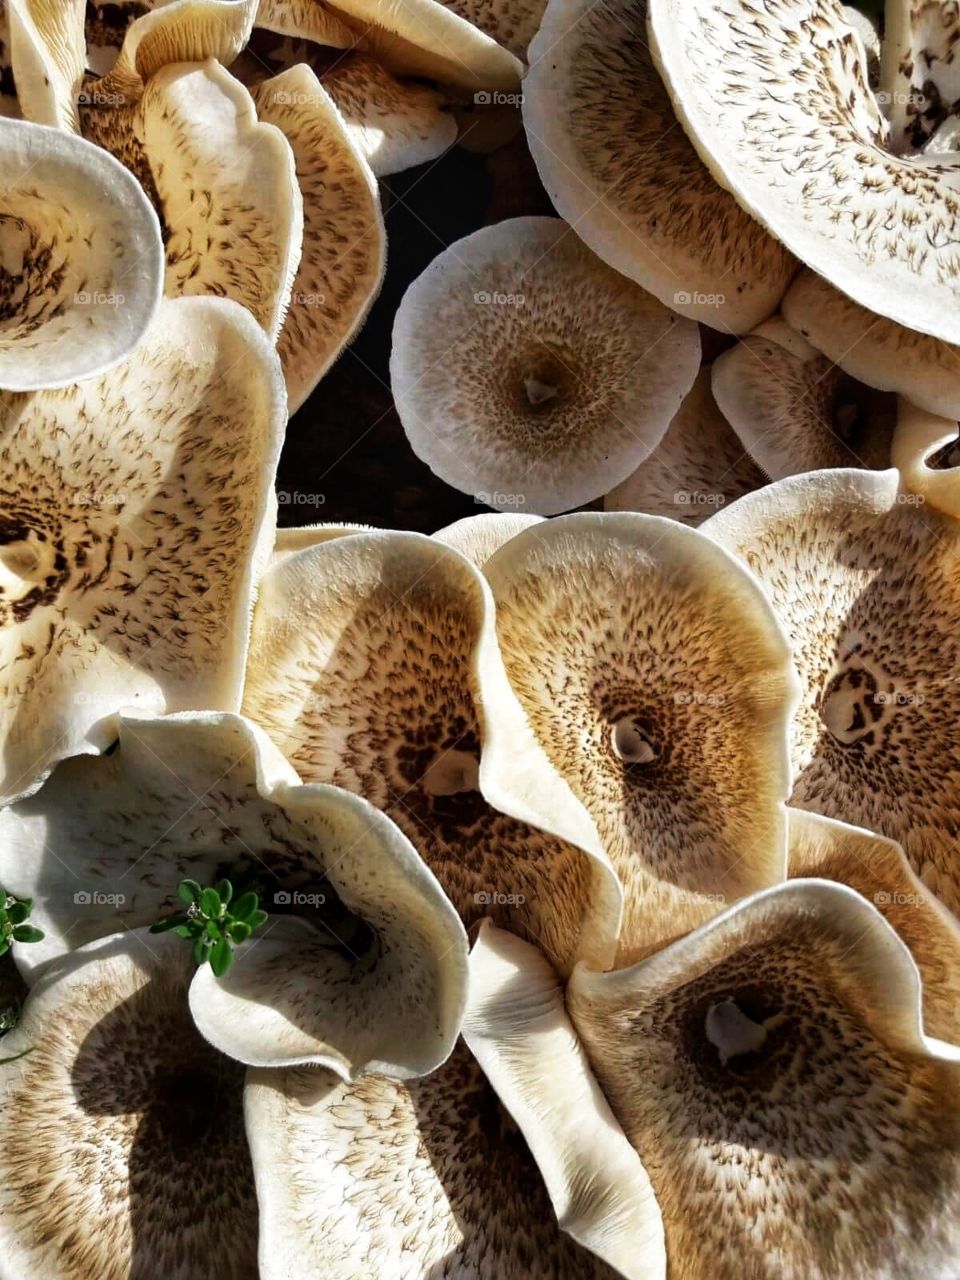 Those are some fairytale mushrooms, don't you think?